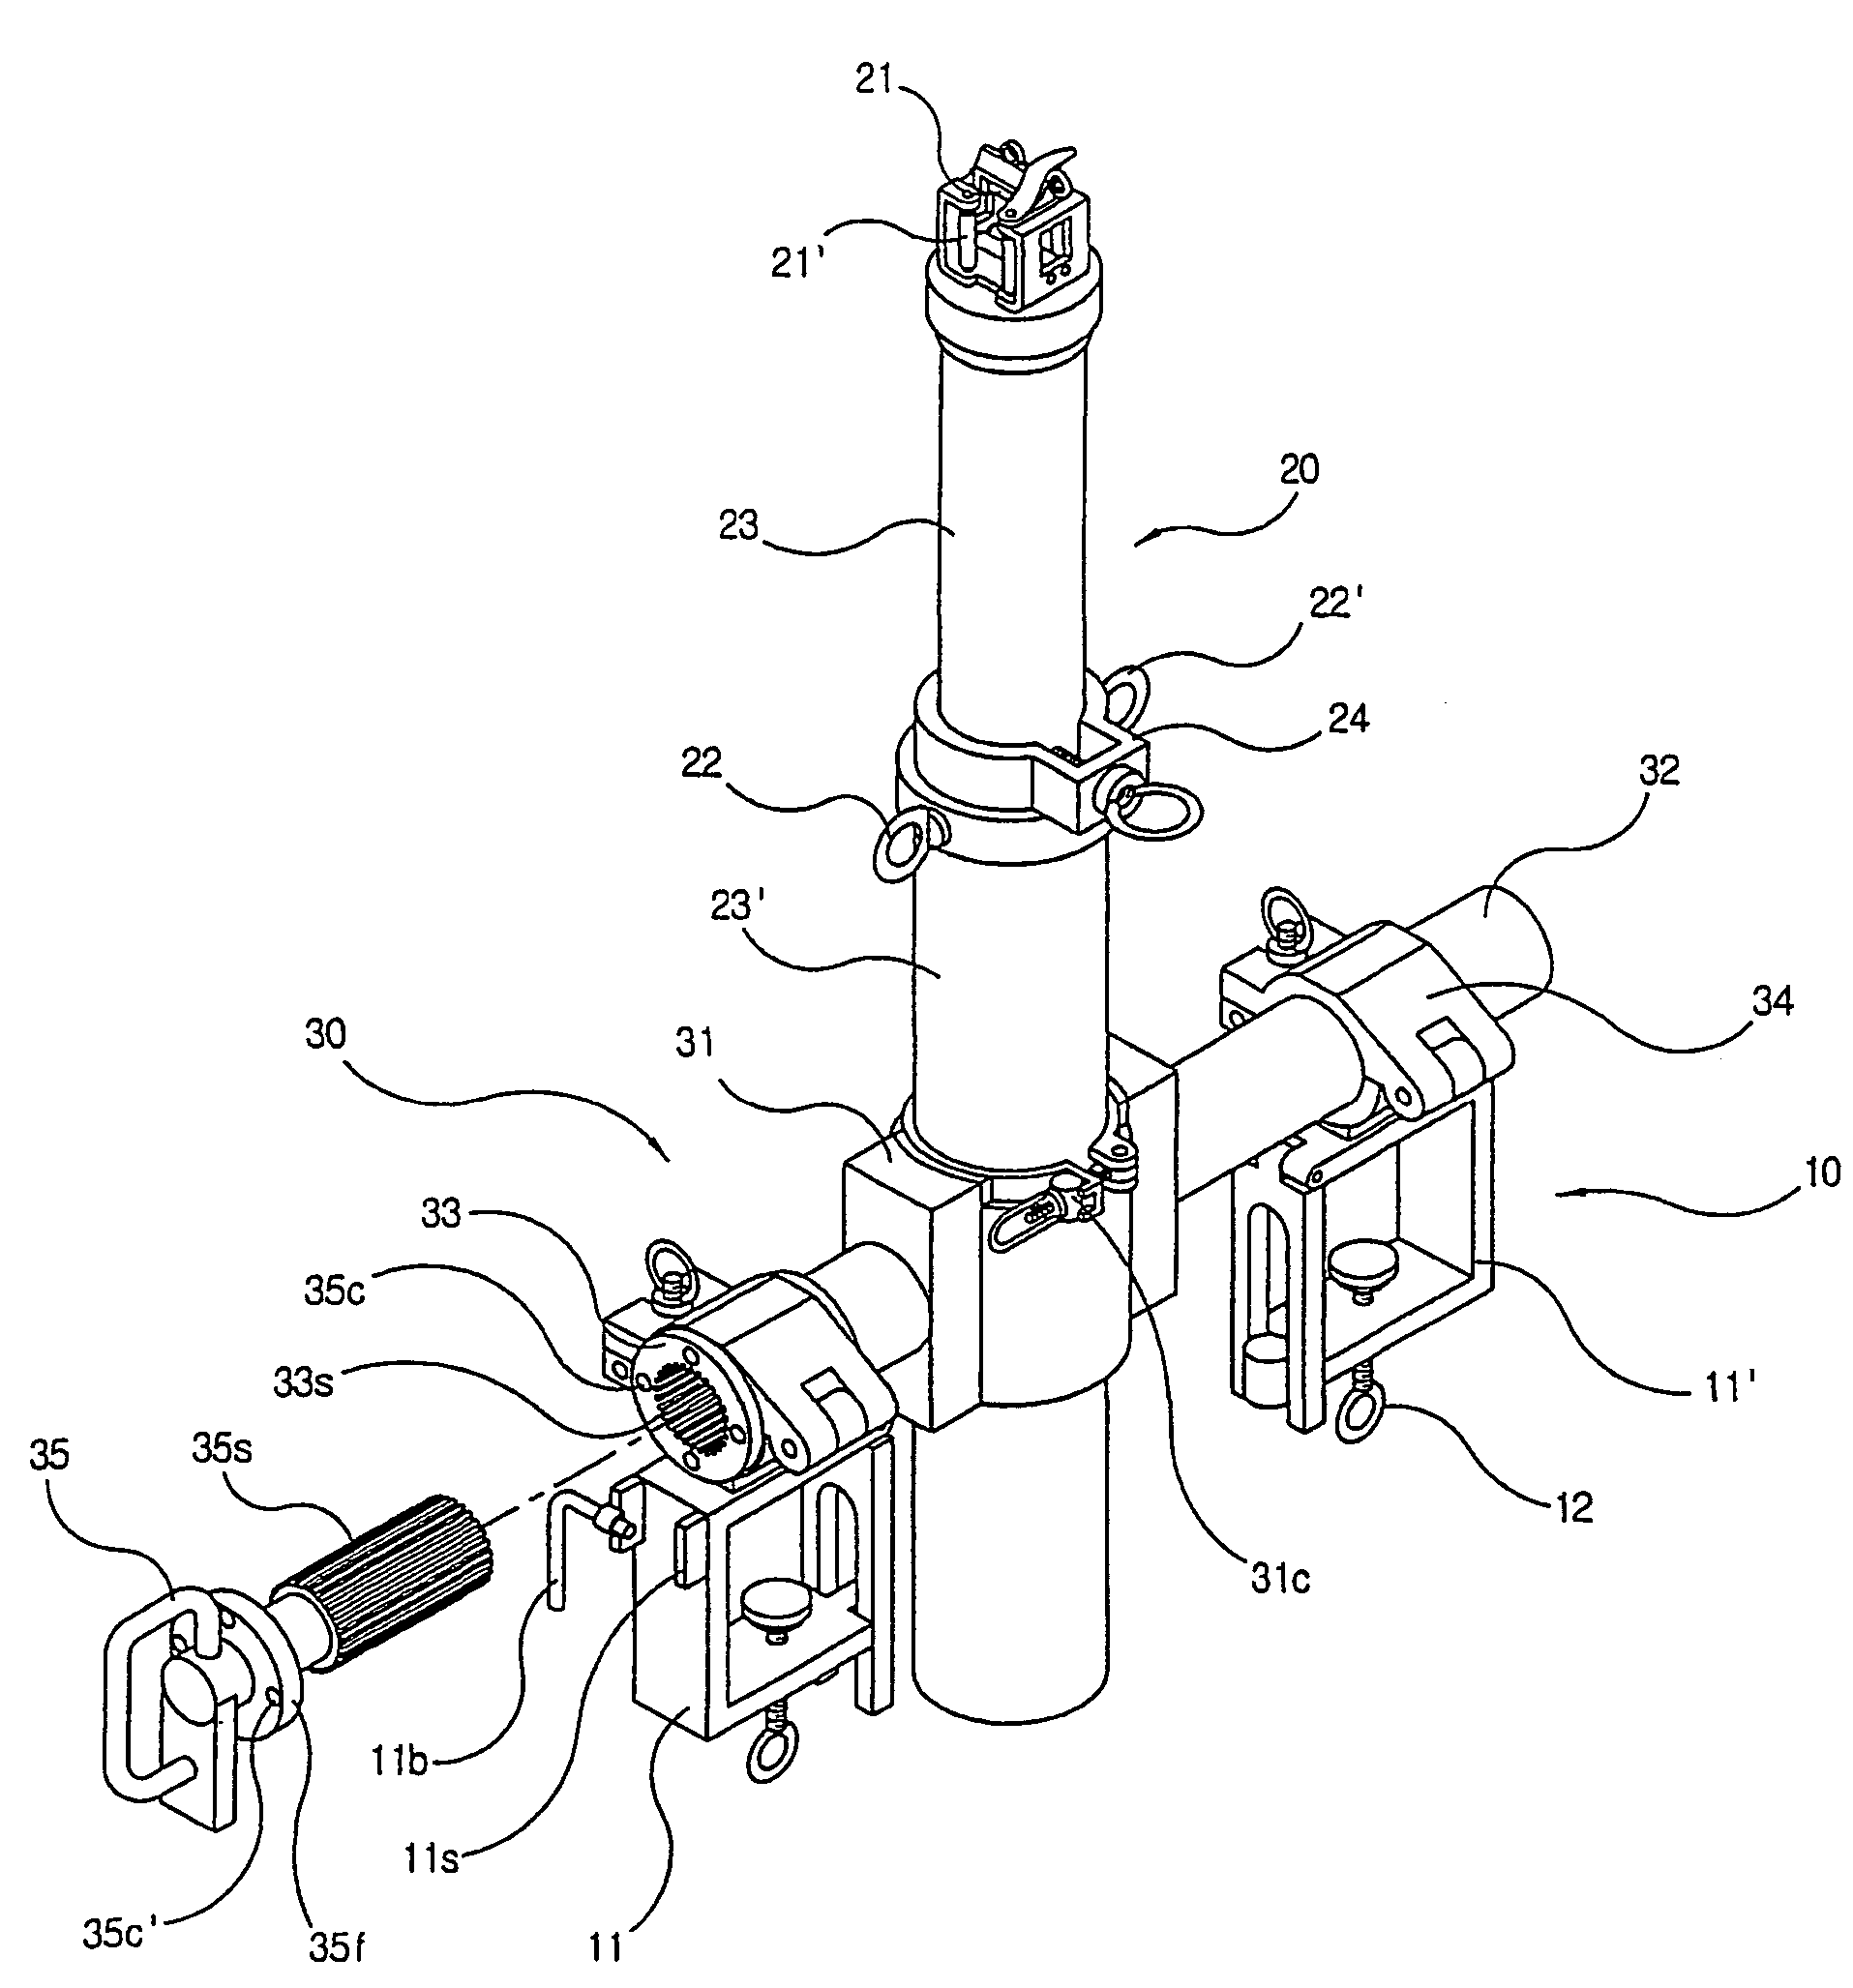 Electric wire changing device for wire replacing works on electric poles and power distributing method without cutting off power supply